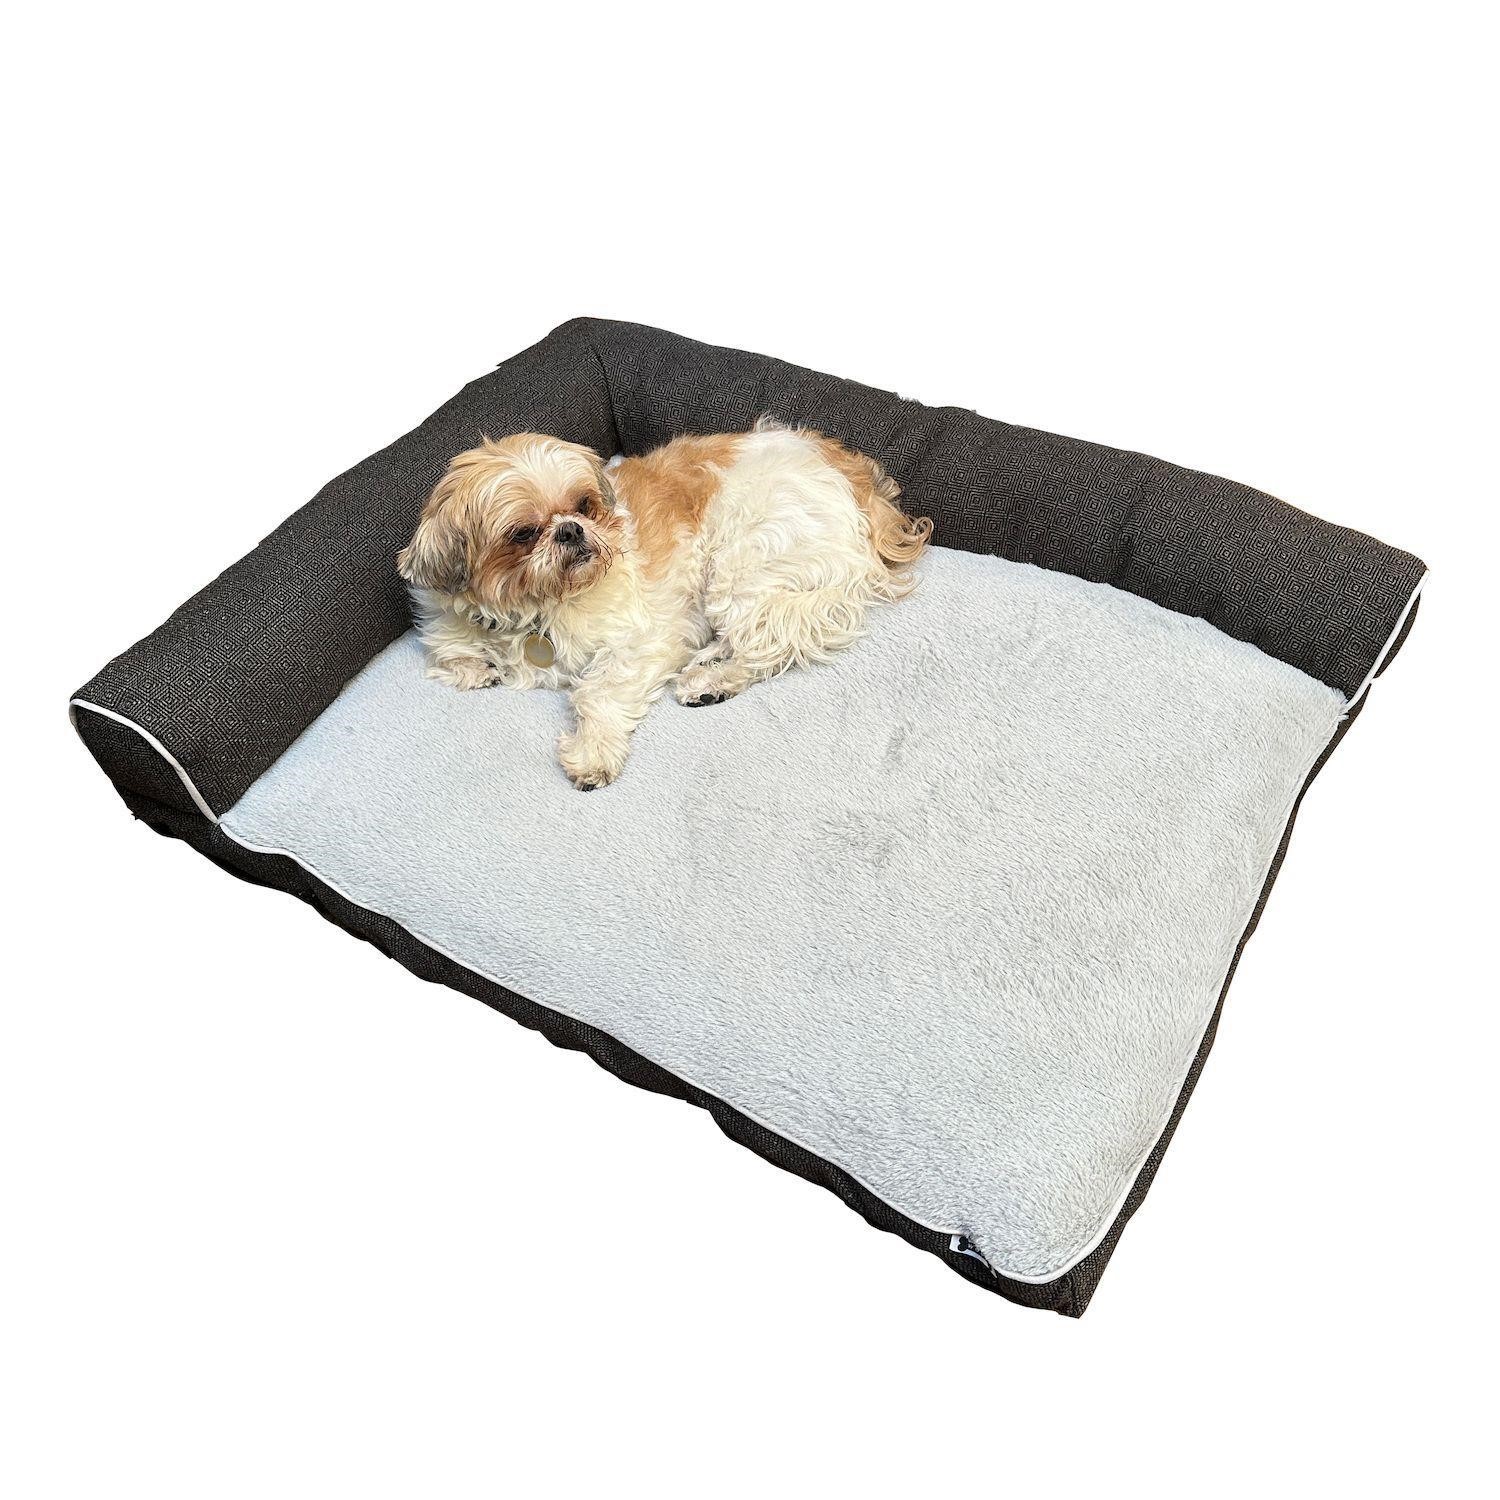 $24 Woof Couch Lounger Pet Bed